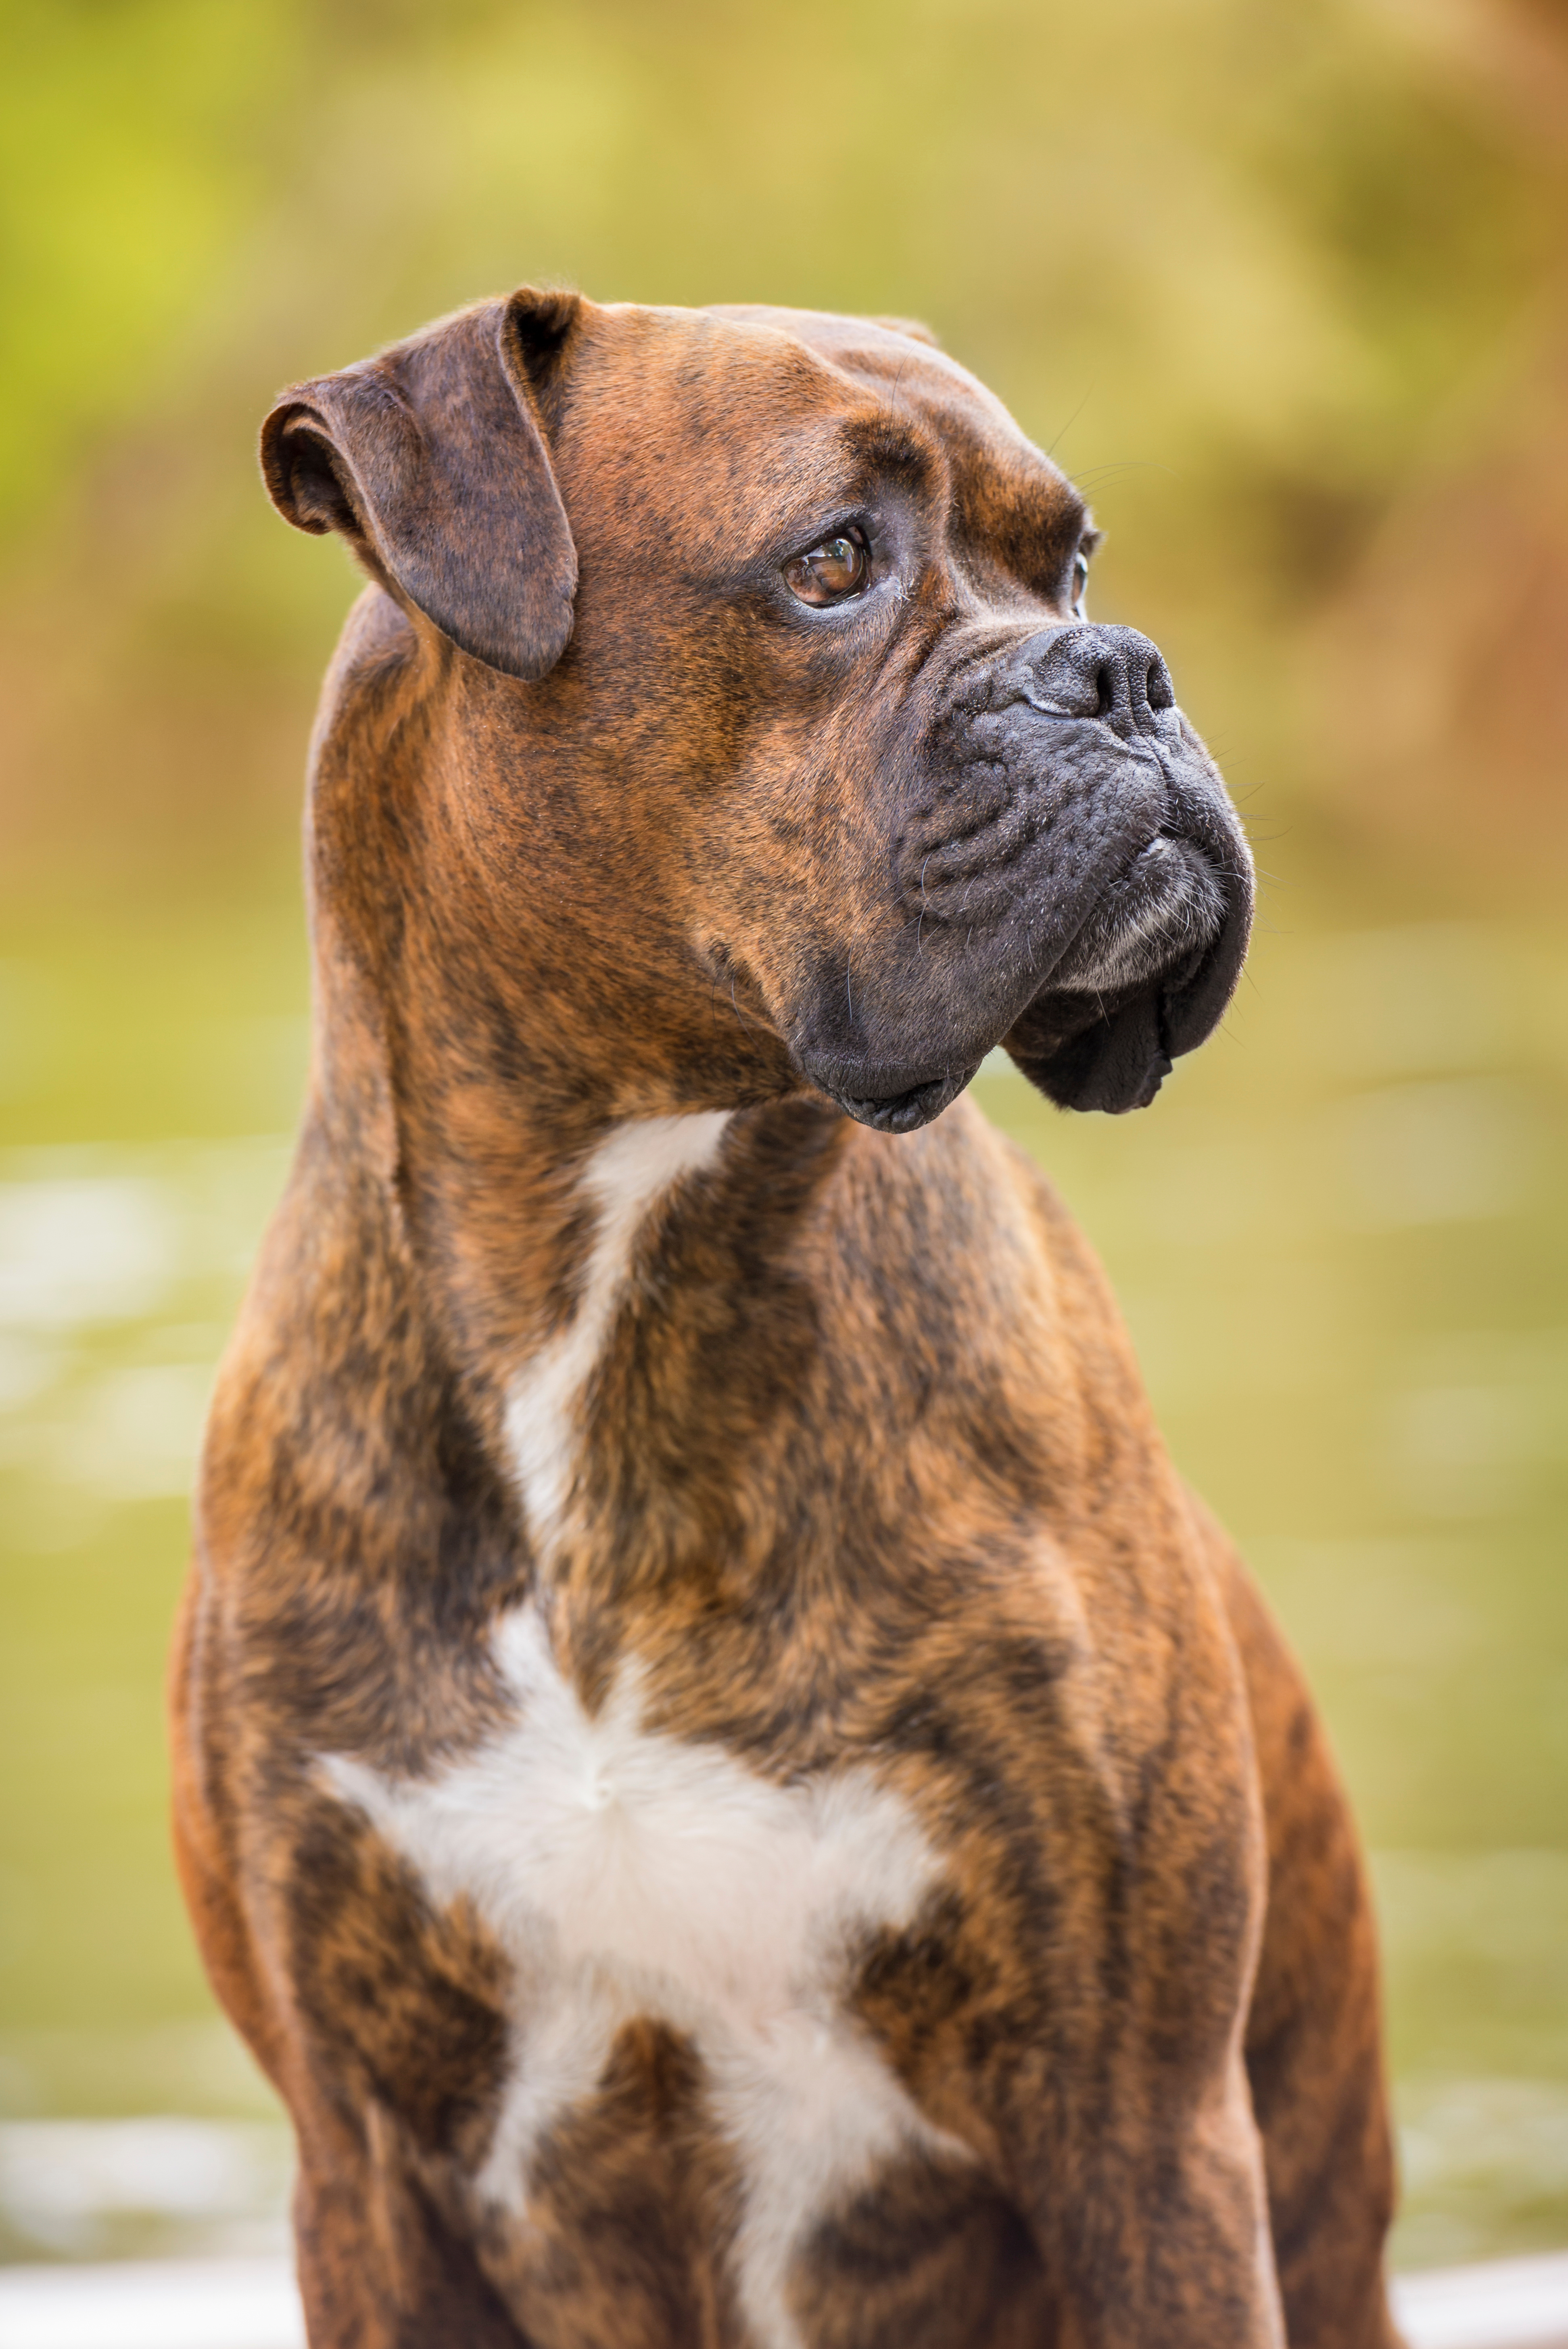 A trained boxer dog - Dog Training Elite Utah County is the best choice for boxer dog training in Utah County, UT!